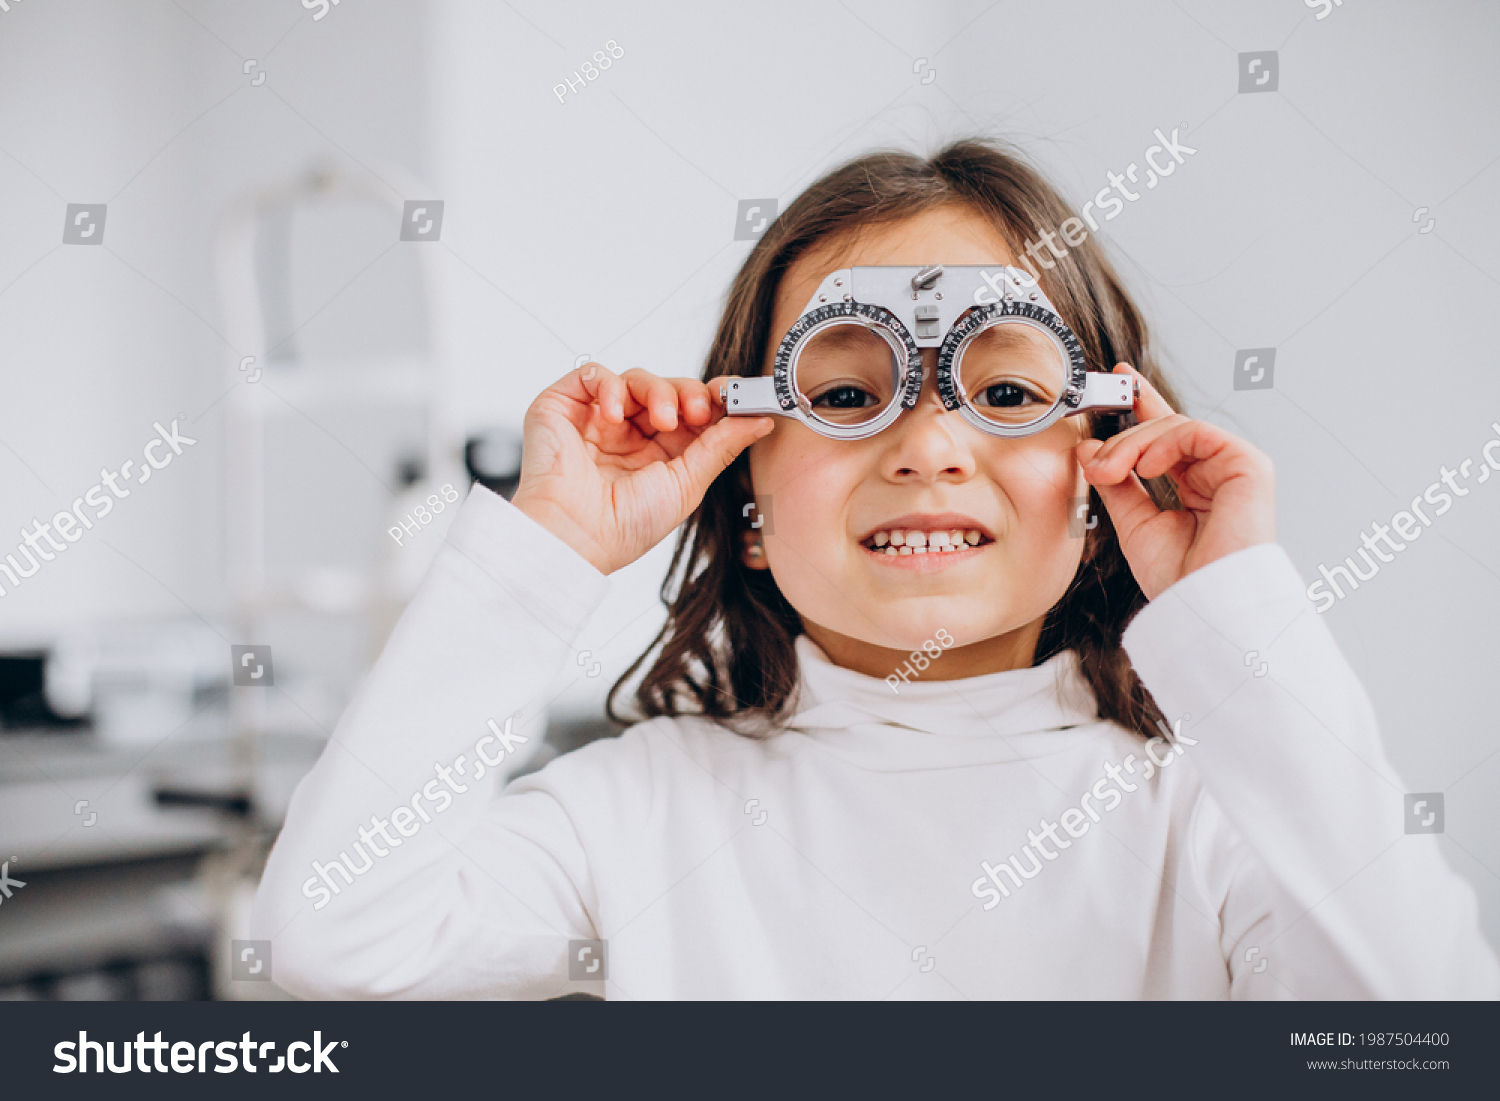 Little girl checking up her sight at ophthalmology center #1987504400